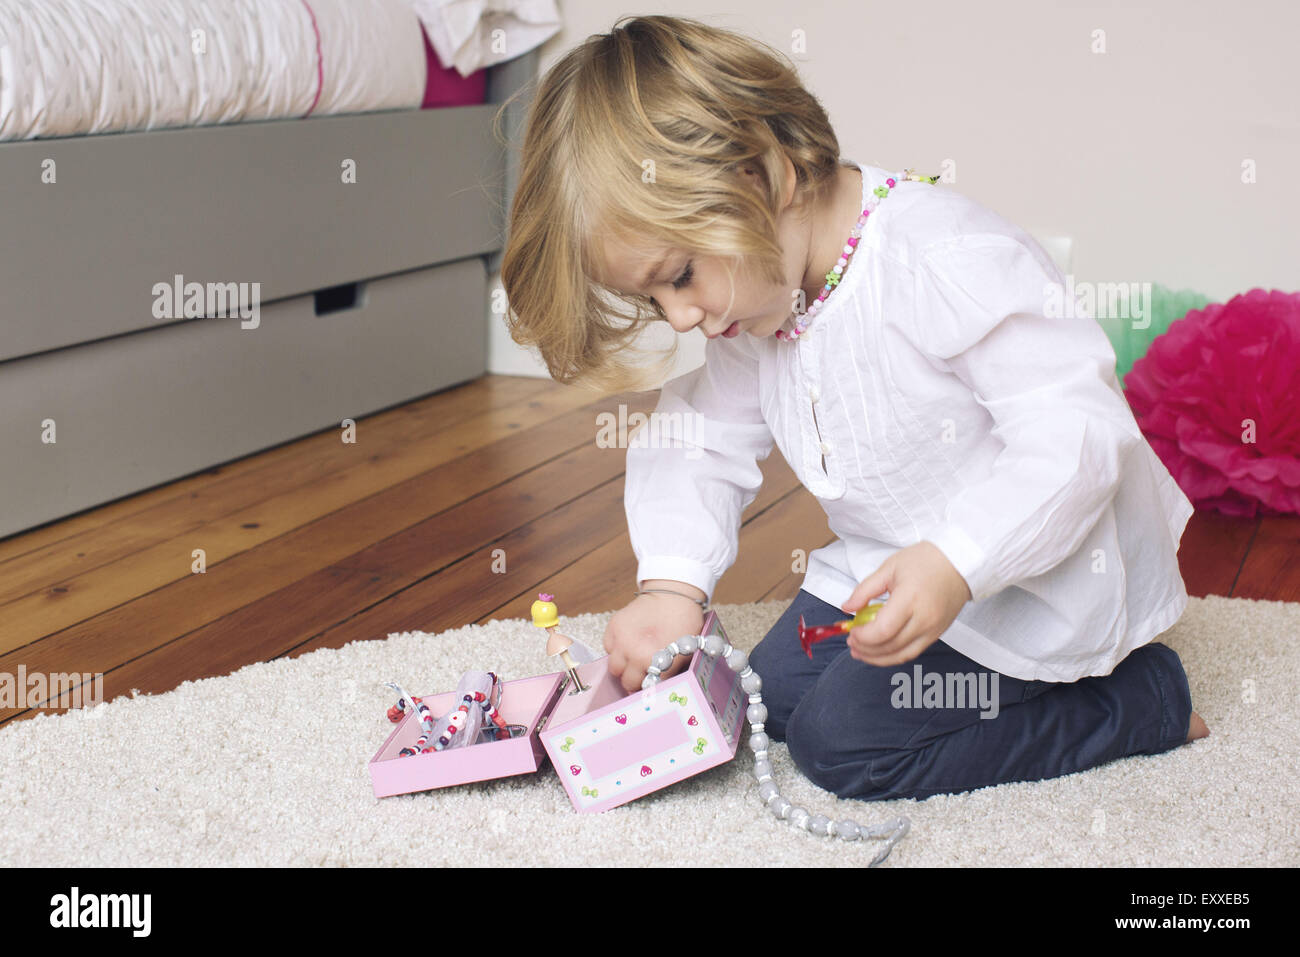 Little girl removing necklace from jewellery box Stock Photo